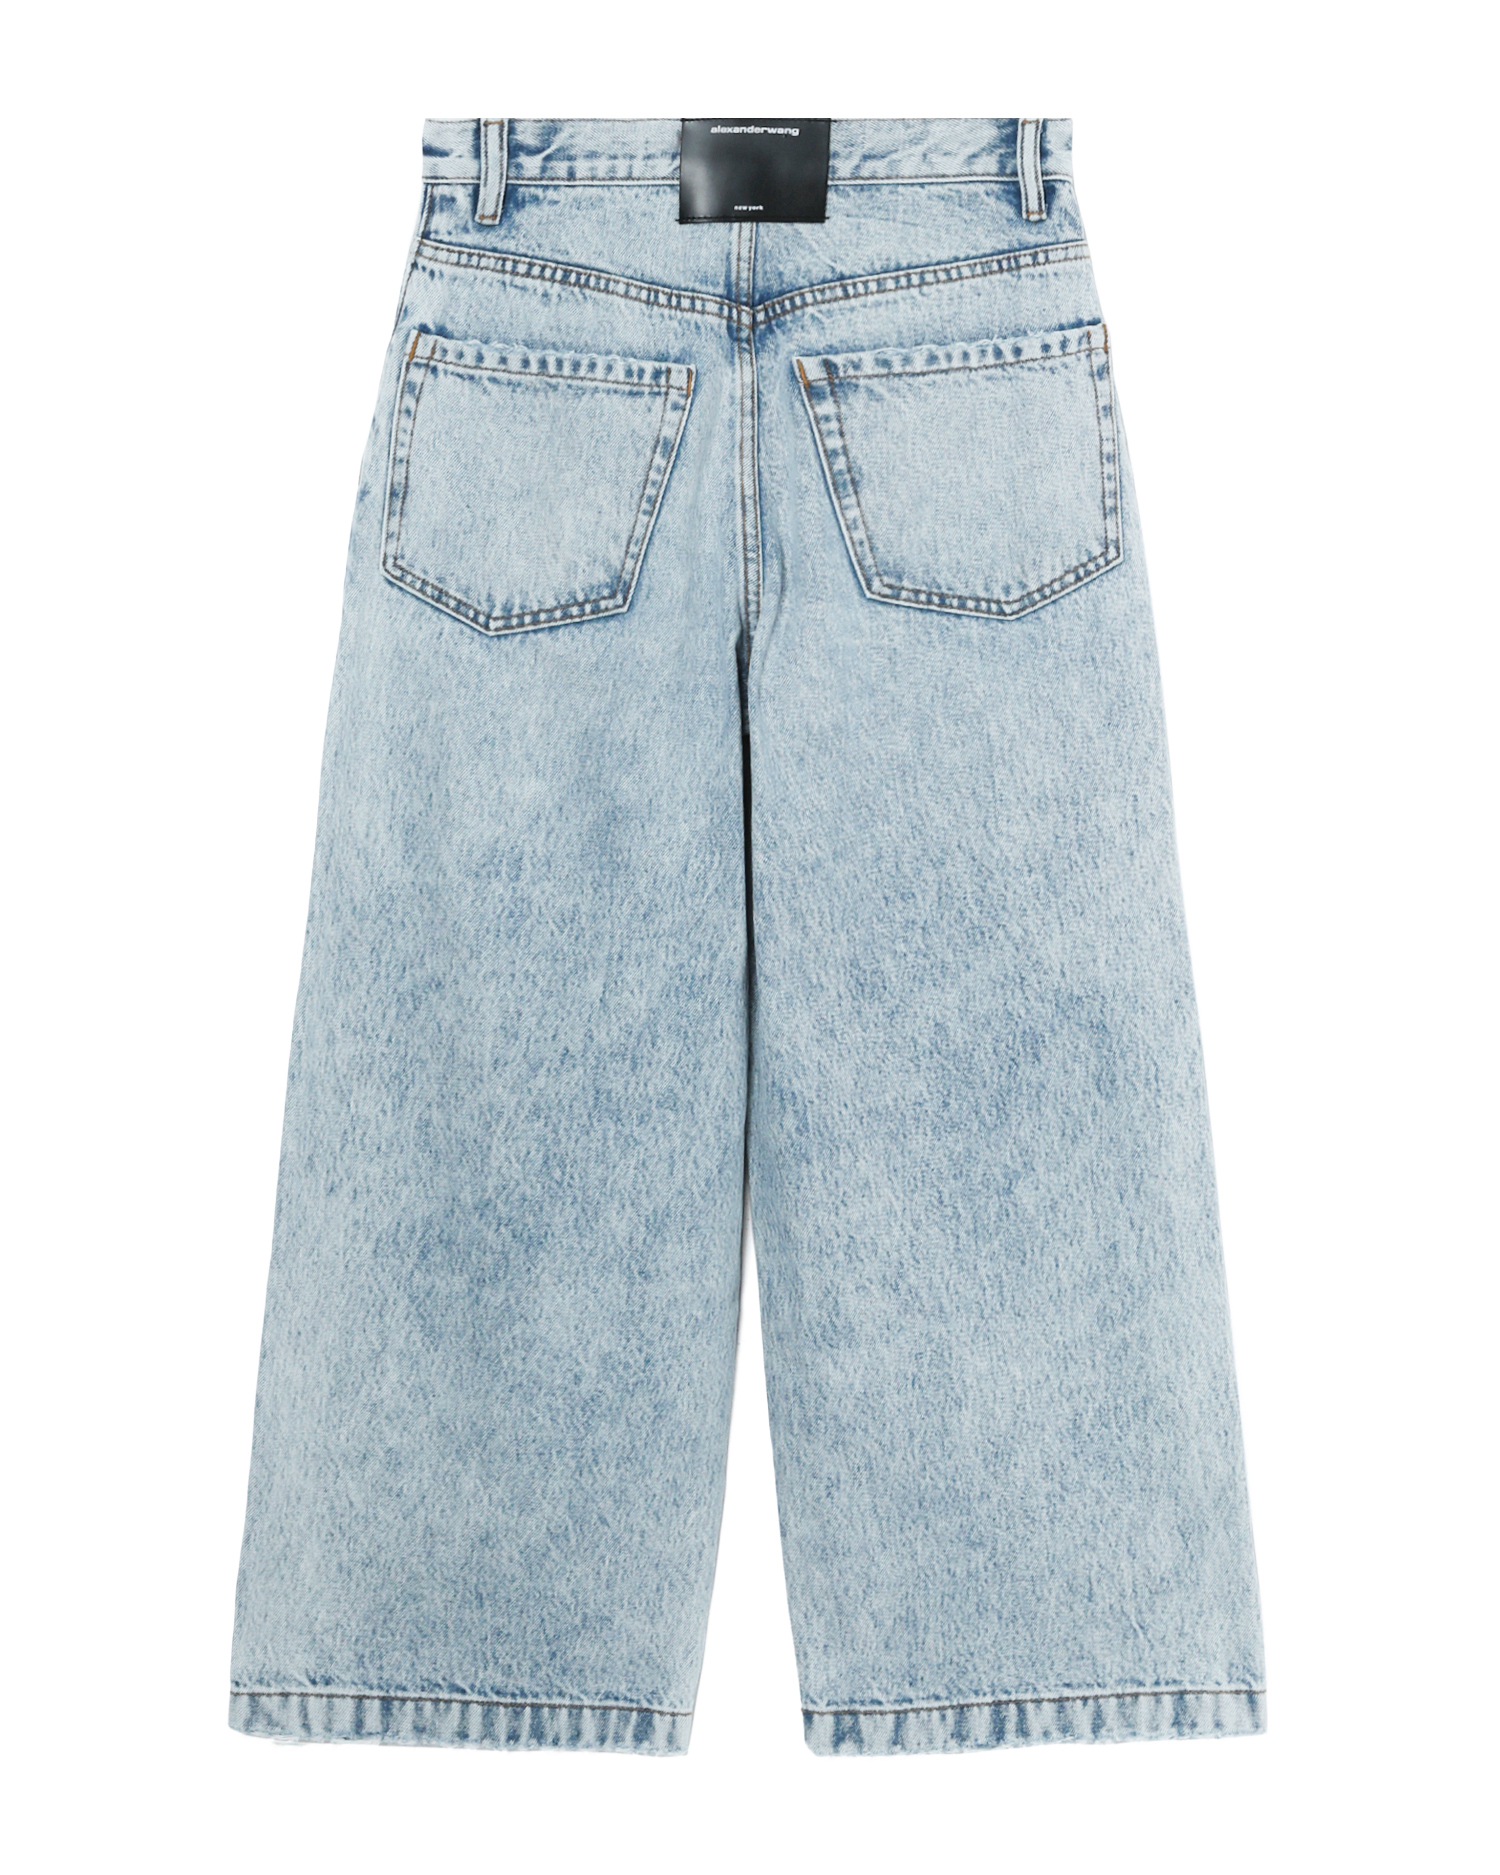 alexander wang.t Frayed edge mid-rise jeans | ITeSHOP